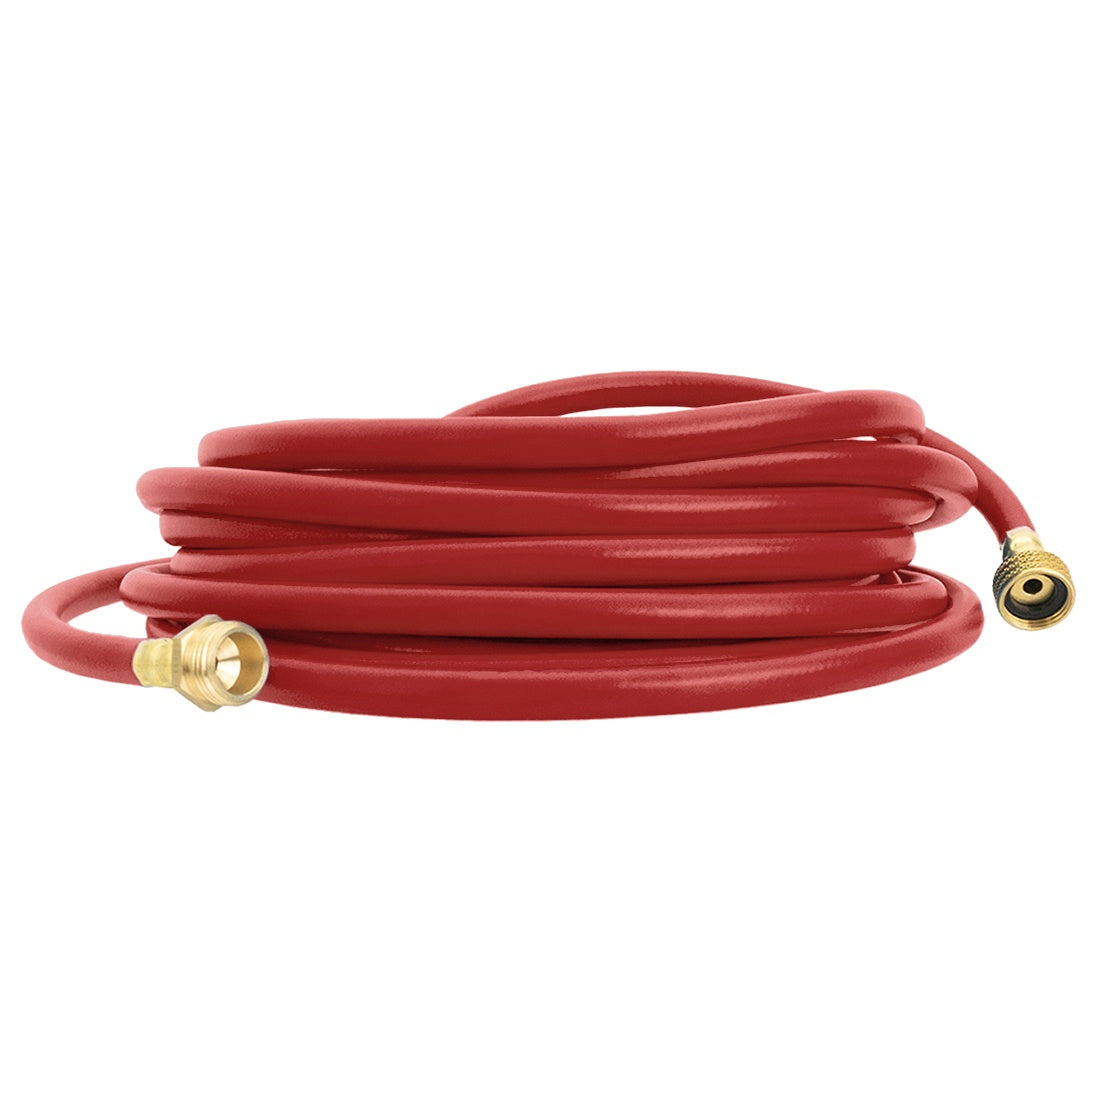 XERO Rubber Hose - 3/8 Inch Red Right Side View